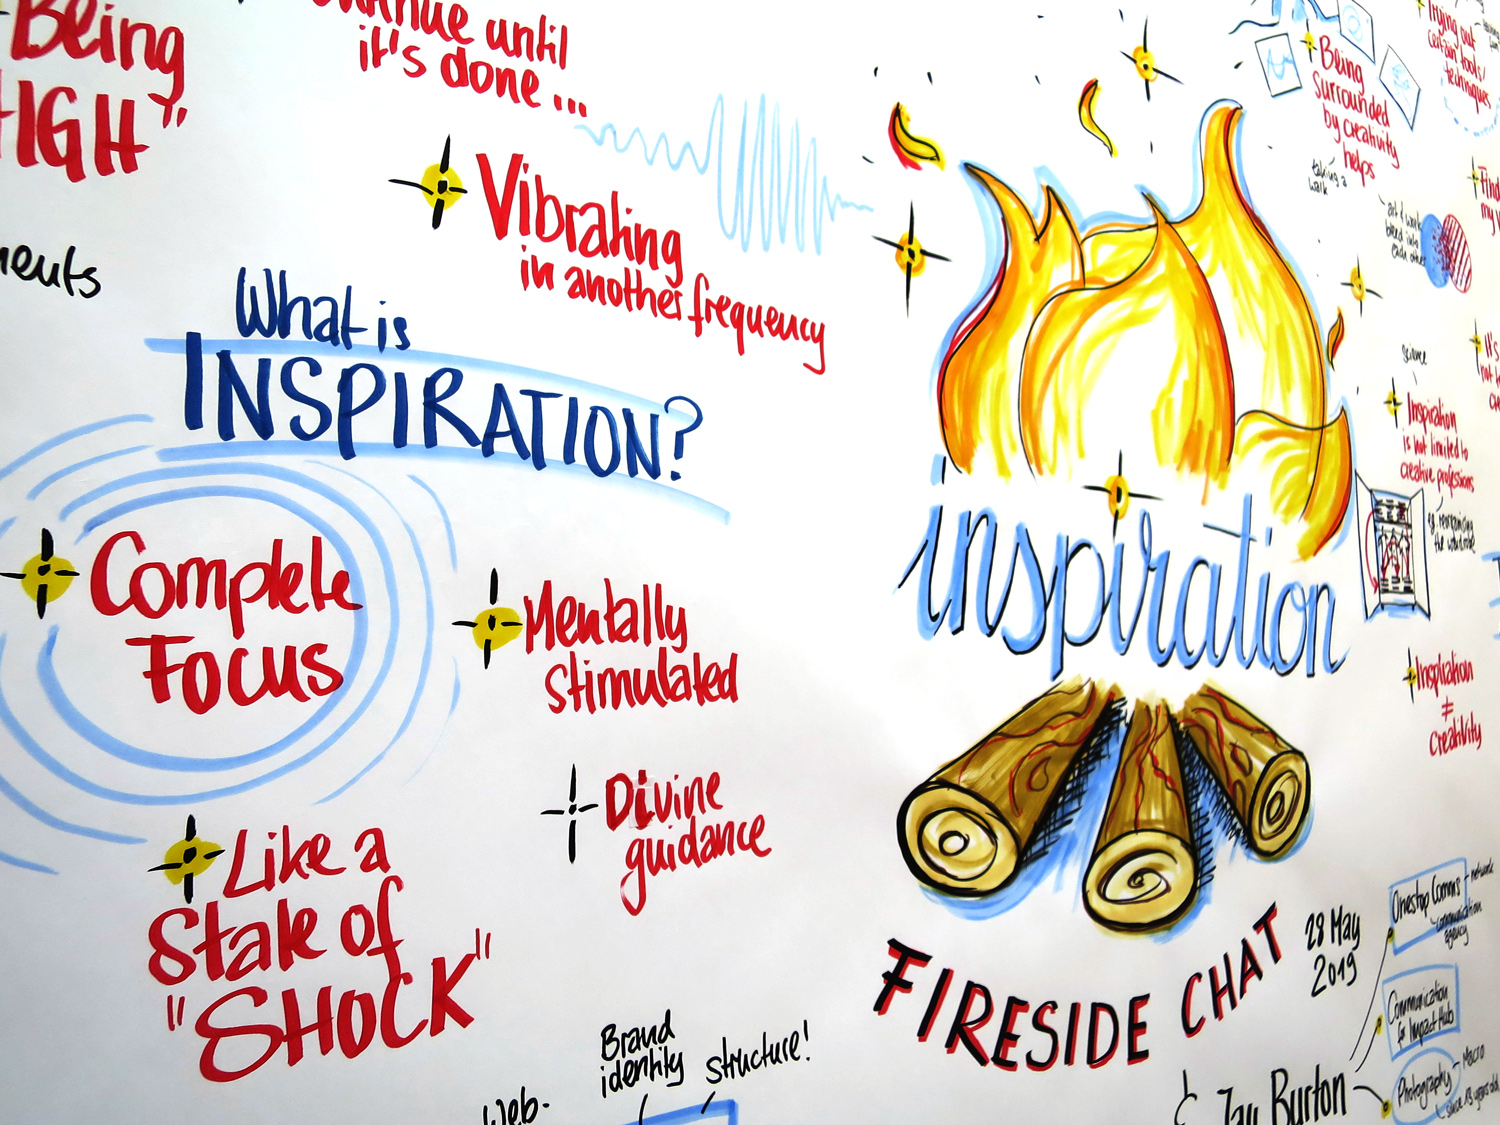 Detail of the visual recording showing a fire in the center.